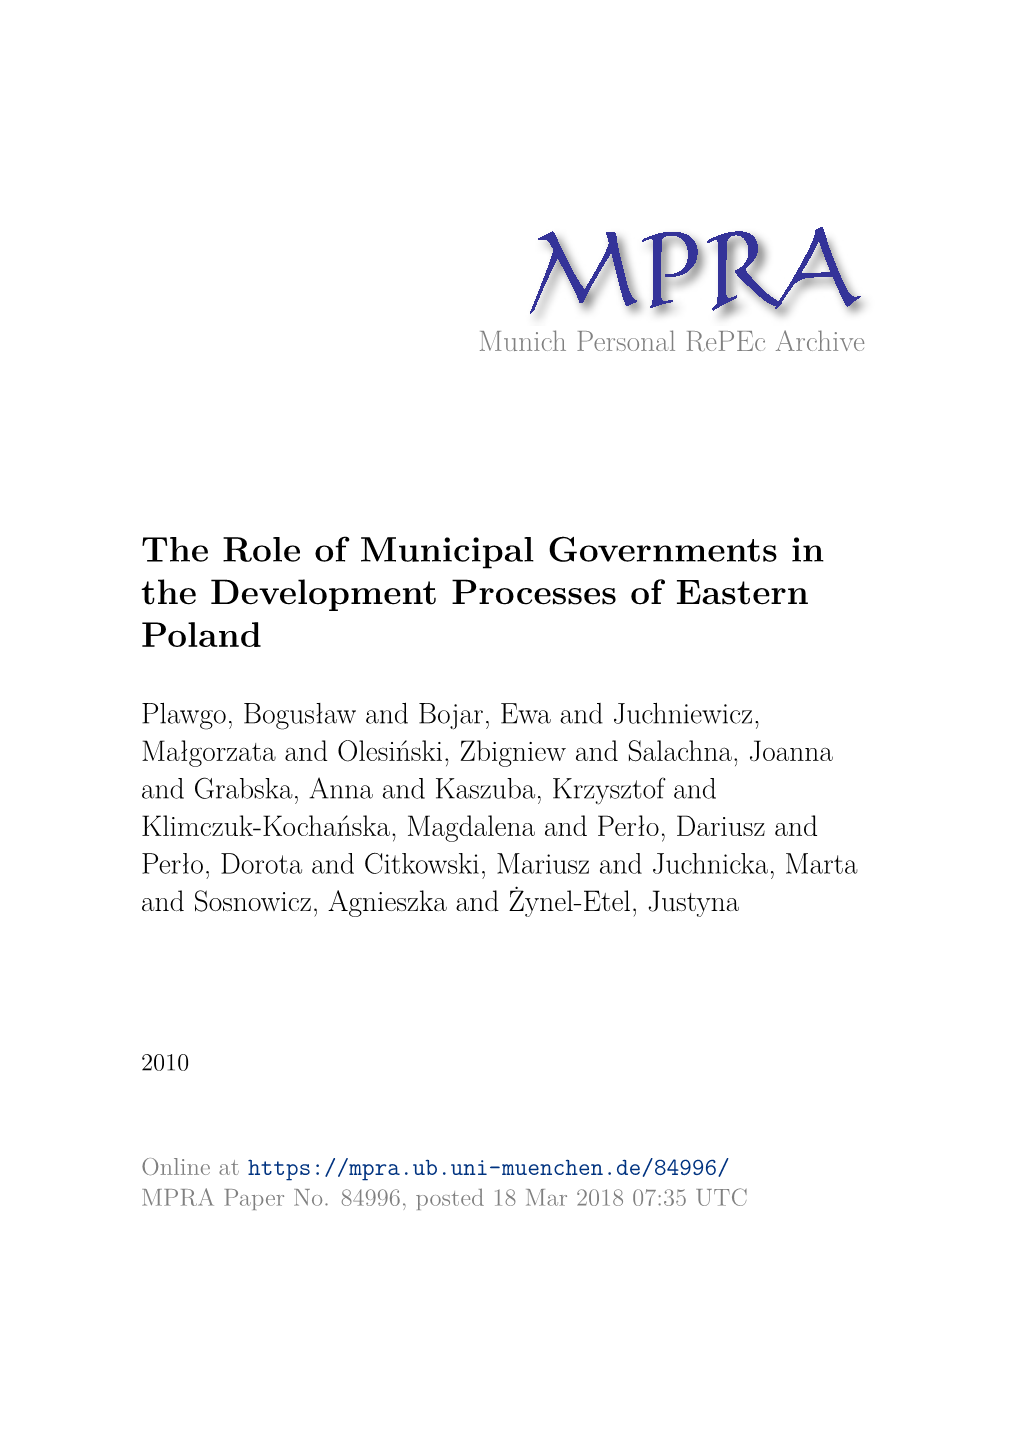 The Role of Municipal Governments in the Development Processes of Eastern Poland